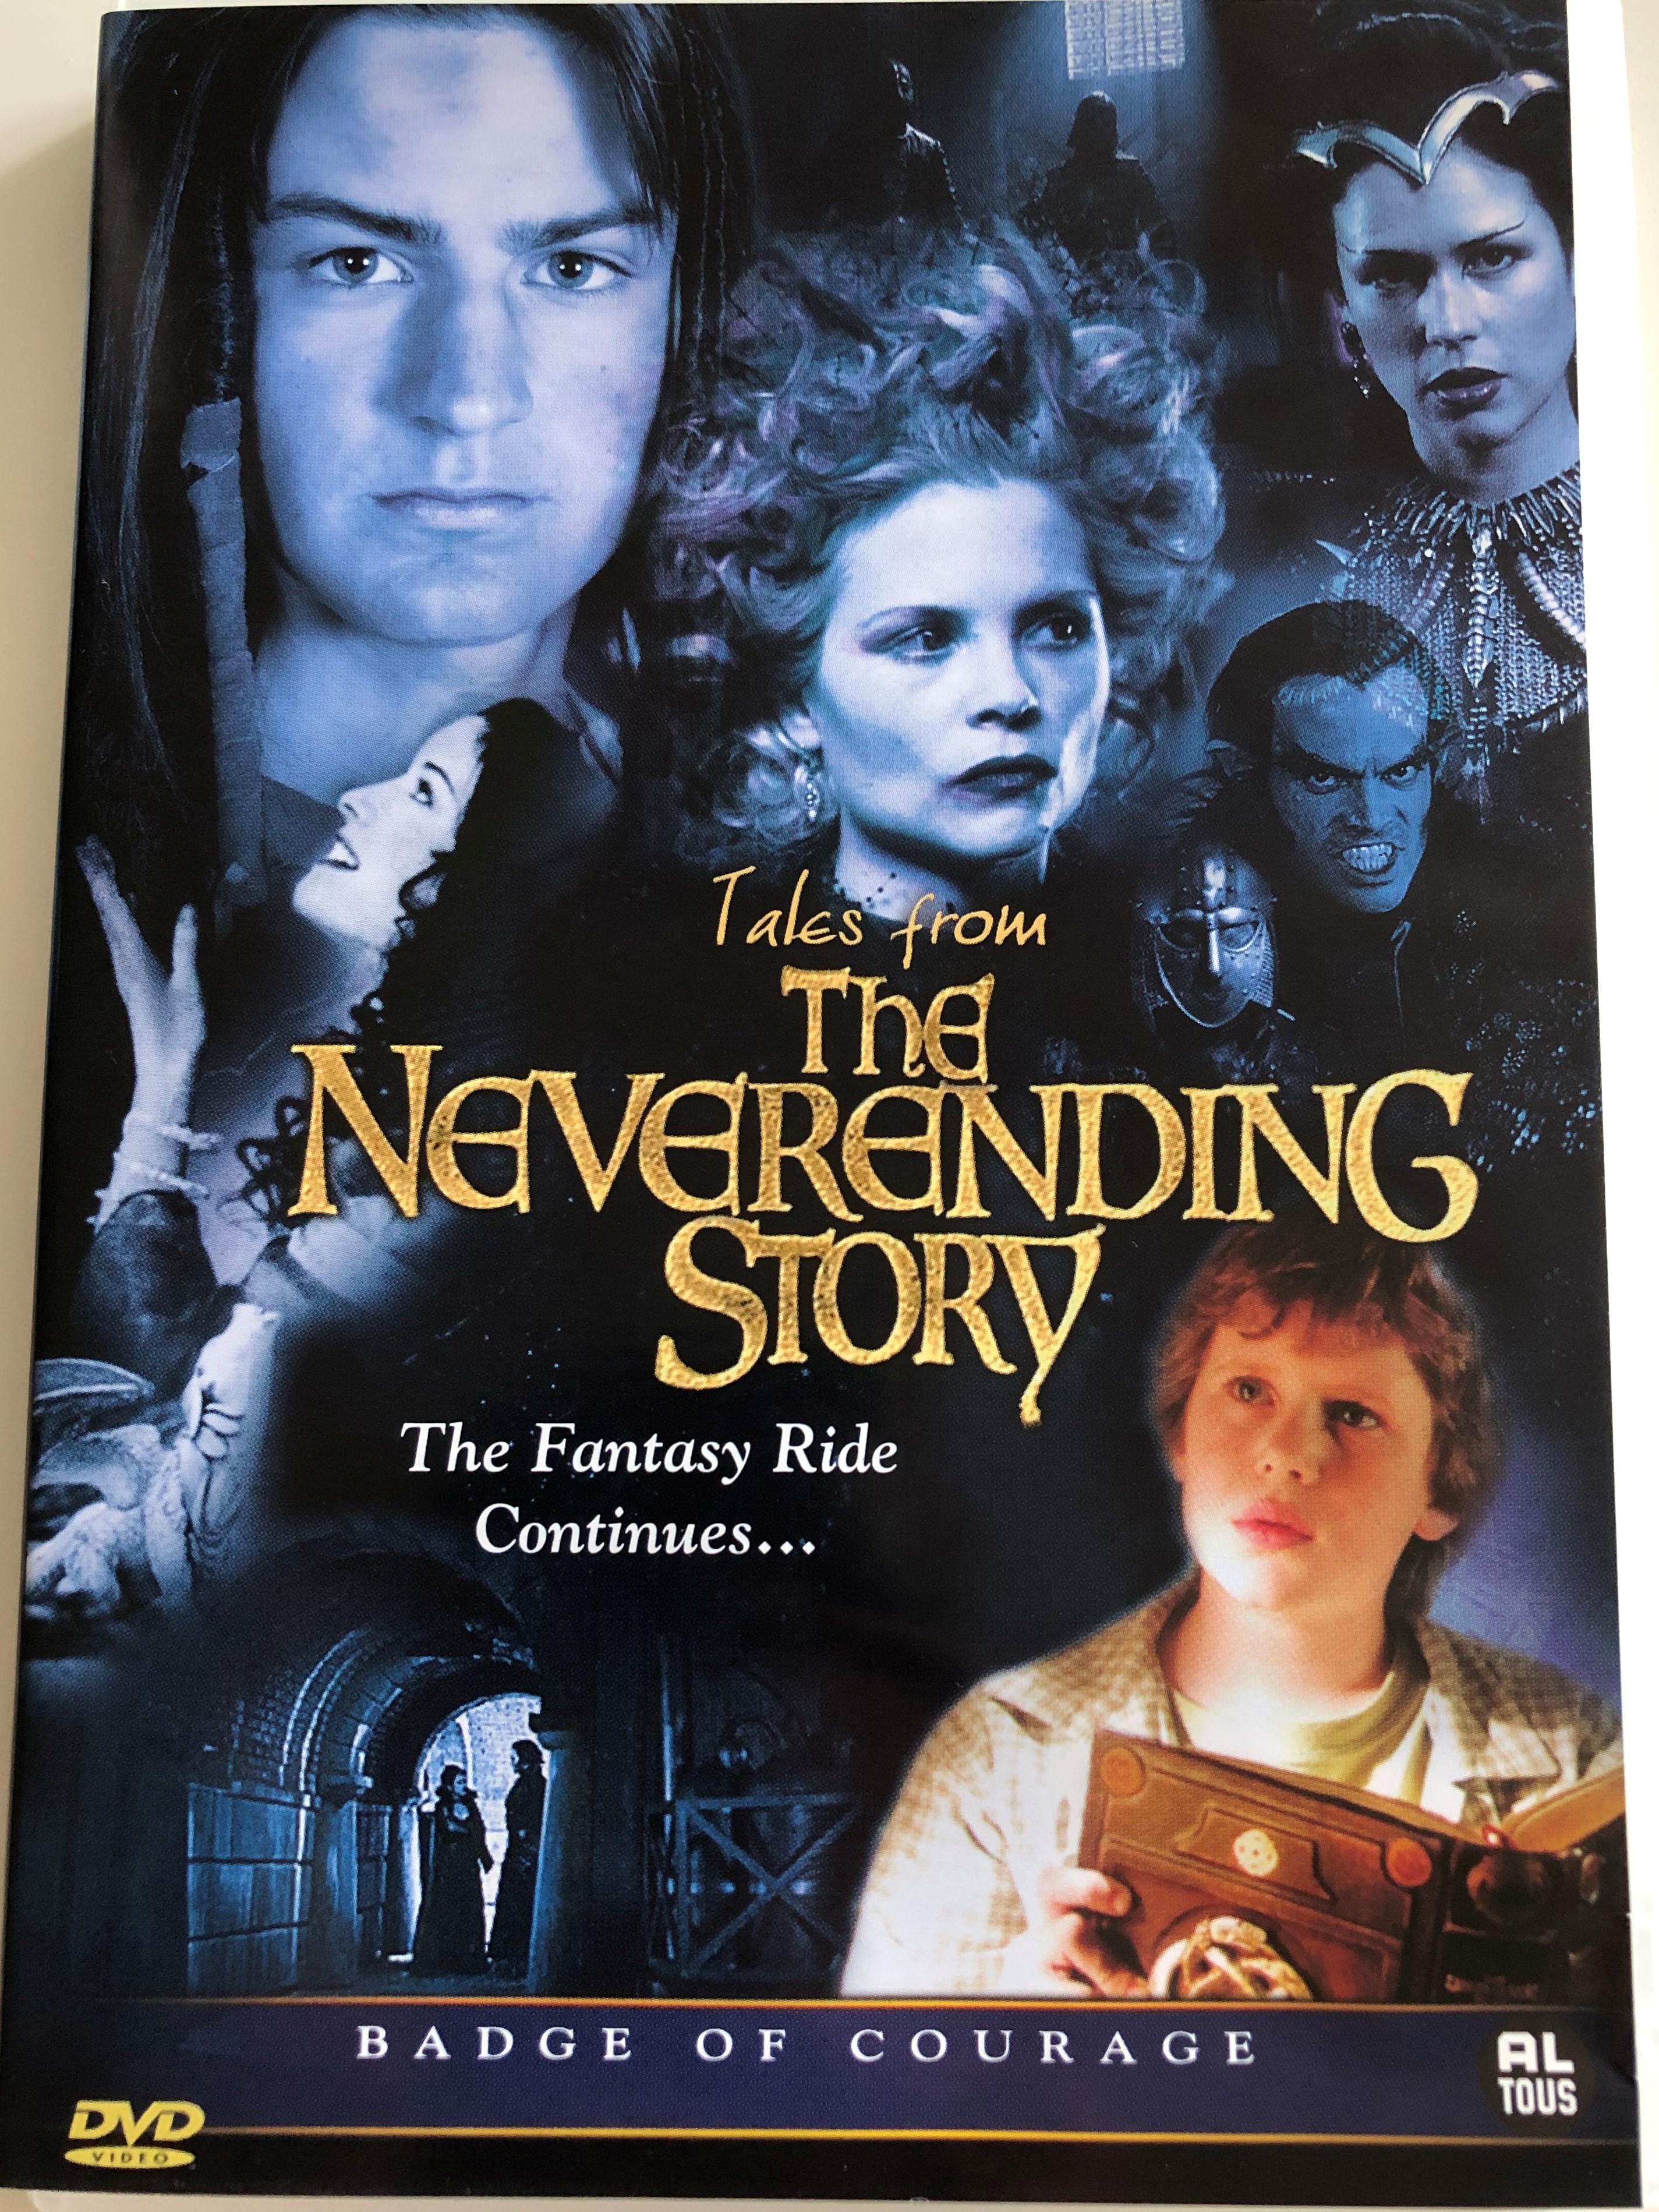 tales-from-the-neverending-story-dvd-2002-the-fantasy-ride-continues..-directed-by-adam-weismann-starring-mark-rendall-tyler-hynes-episode-9-13-badge-of-courage-ressurection-1-.jpg